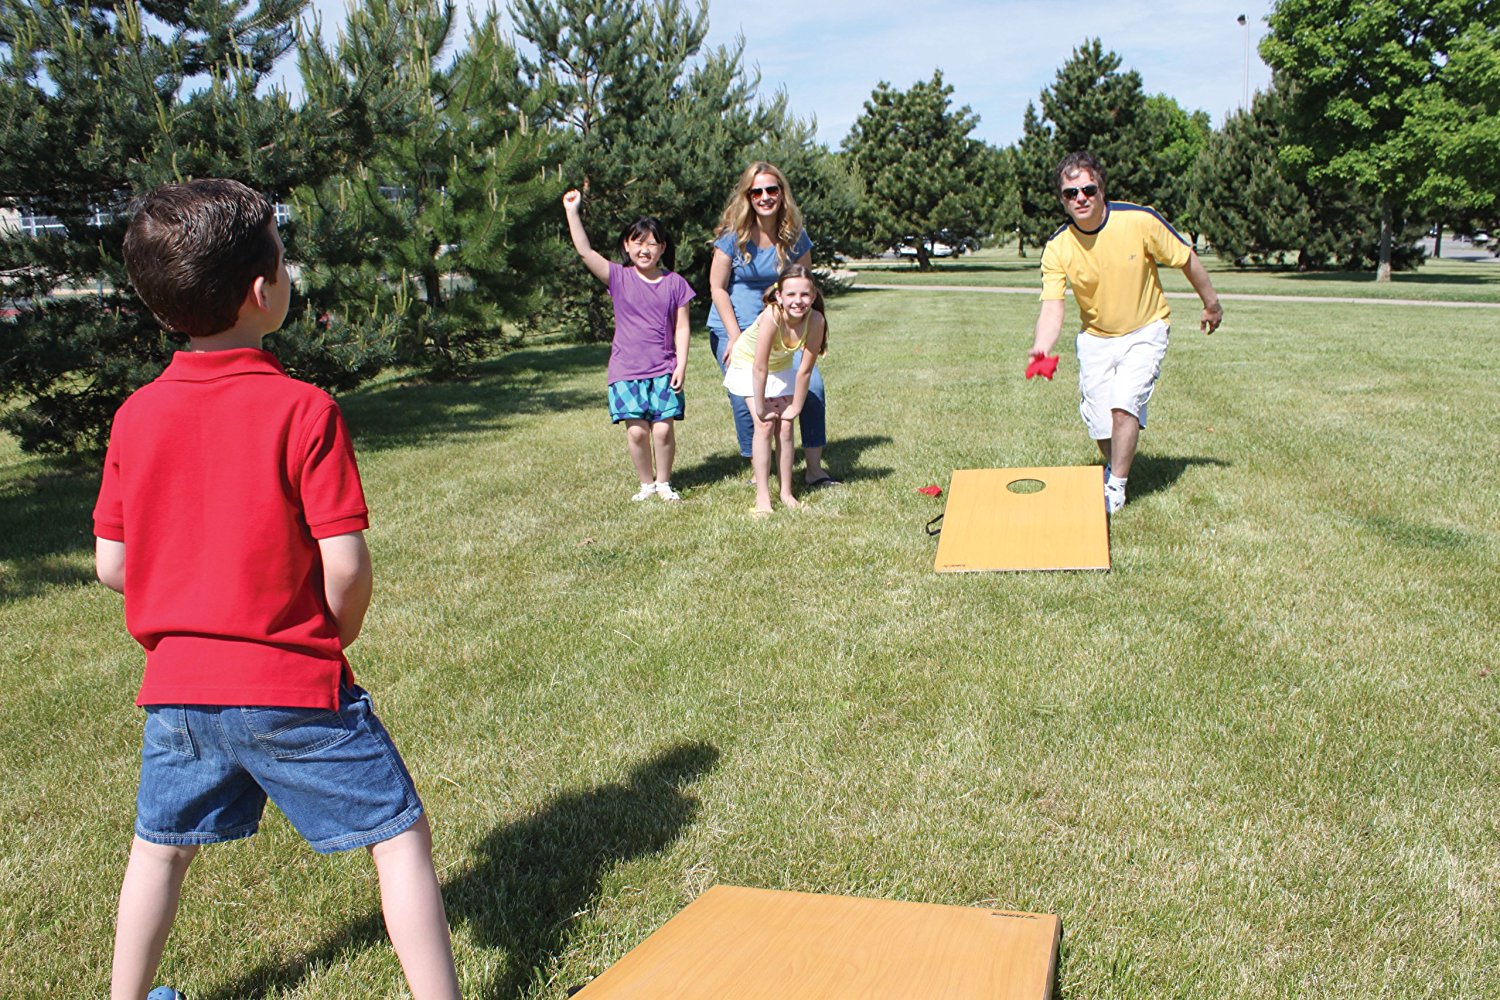 How to Play the Cornhole Game